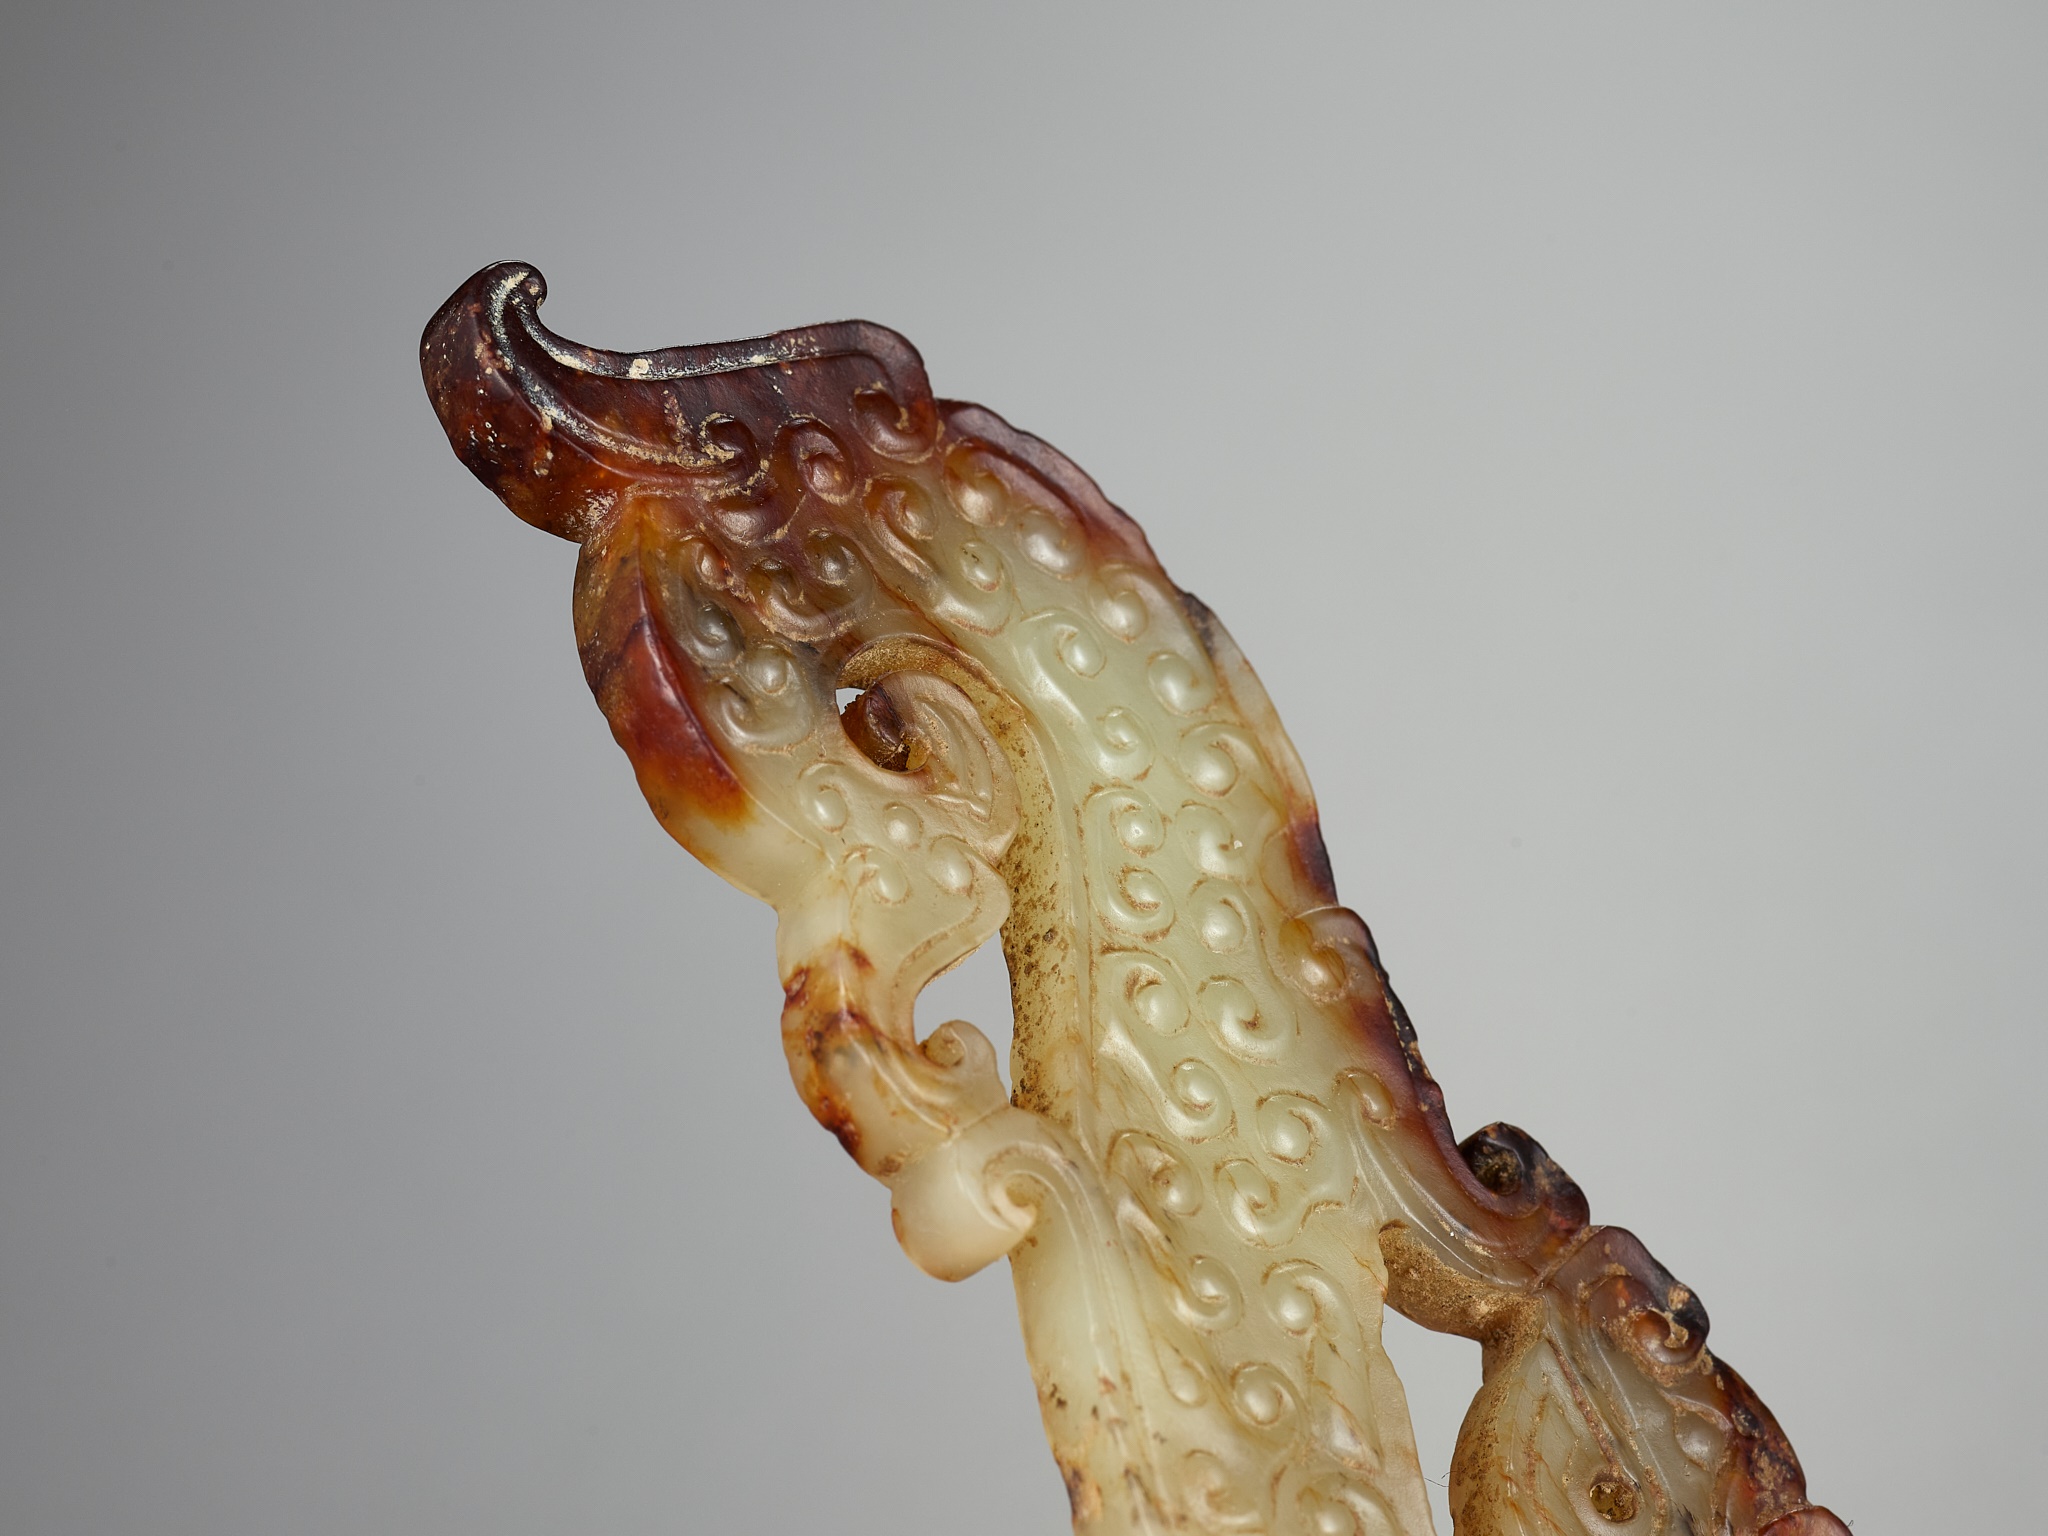 AN ARCHAIC YELLOW & RUSSET JADE DRAGON PENDANT, EASTERN ZHOU DYNASTY - Image 11 of 13